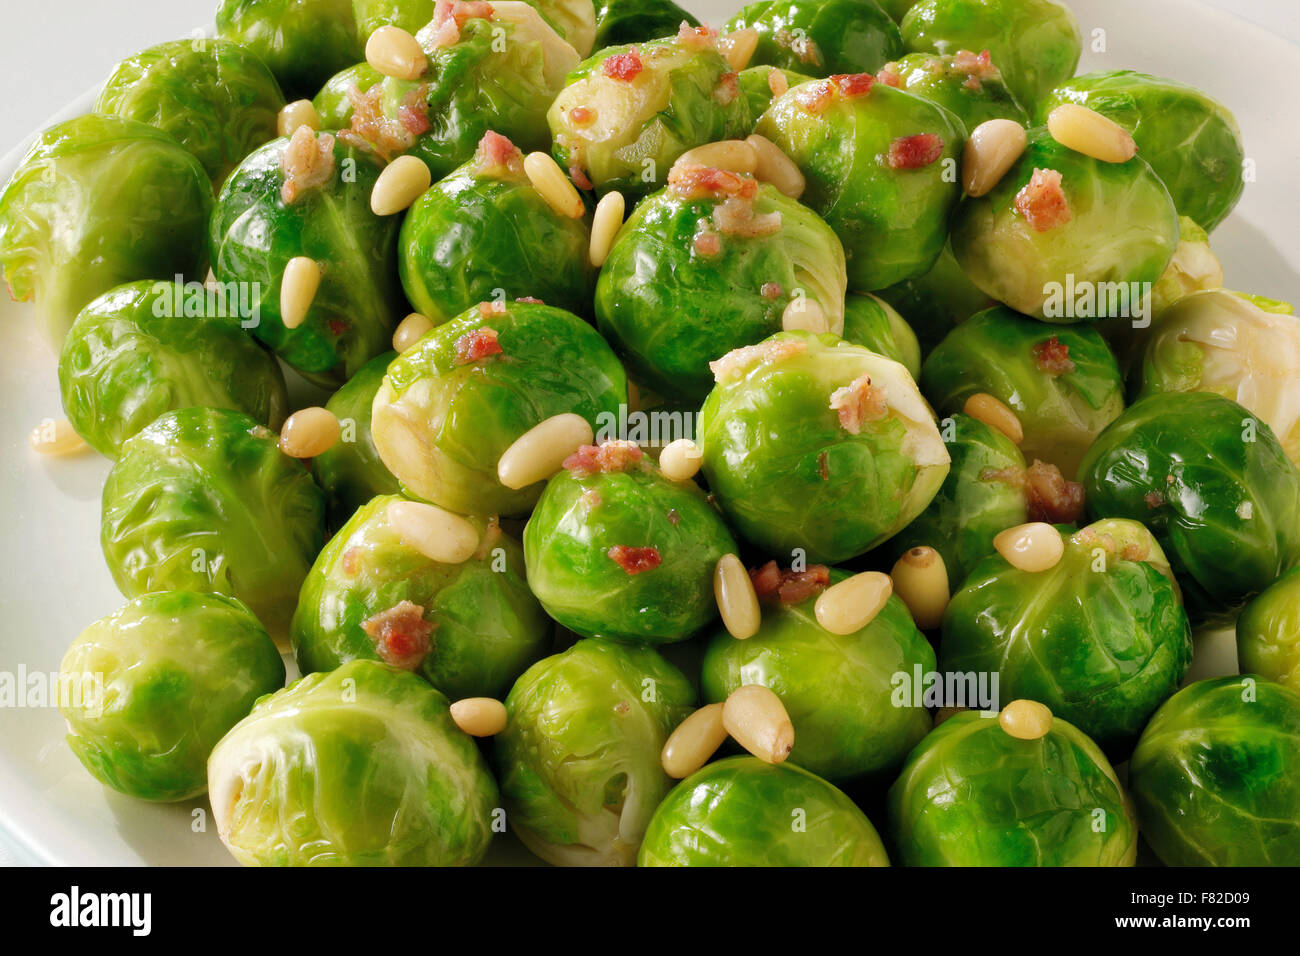 Cooked brussel sprouts with pine nuts Stock Photo